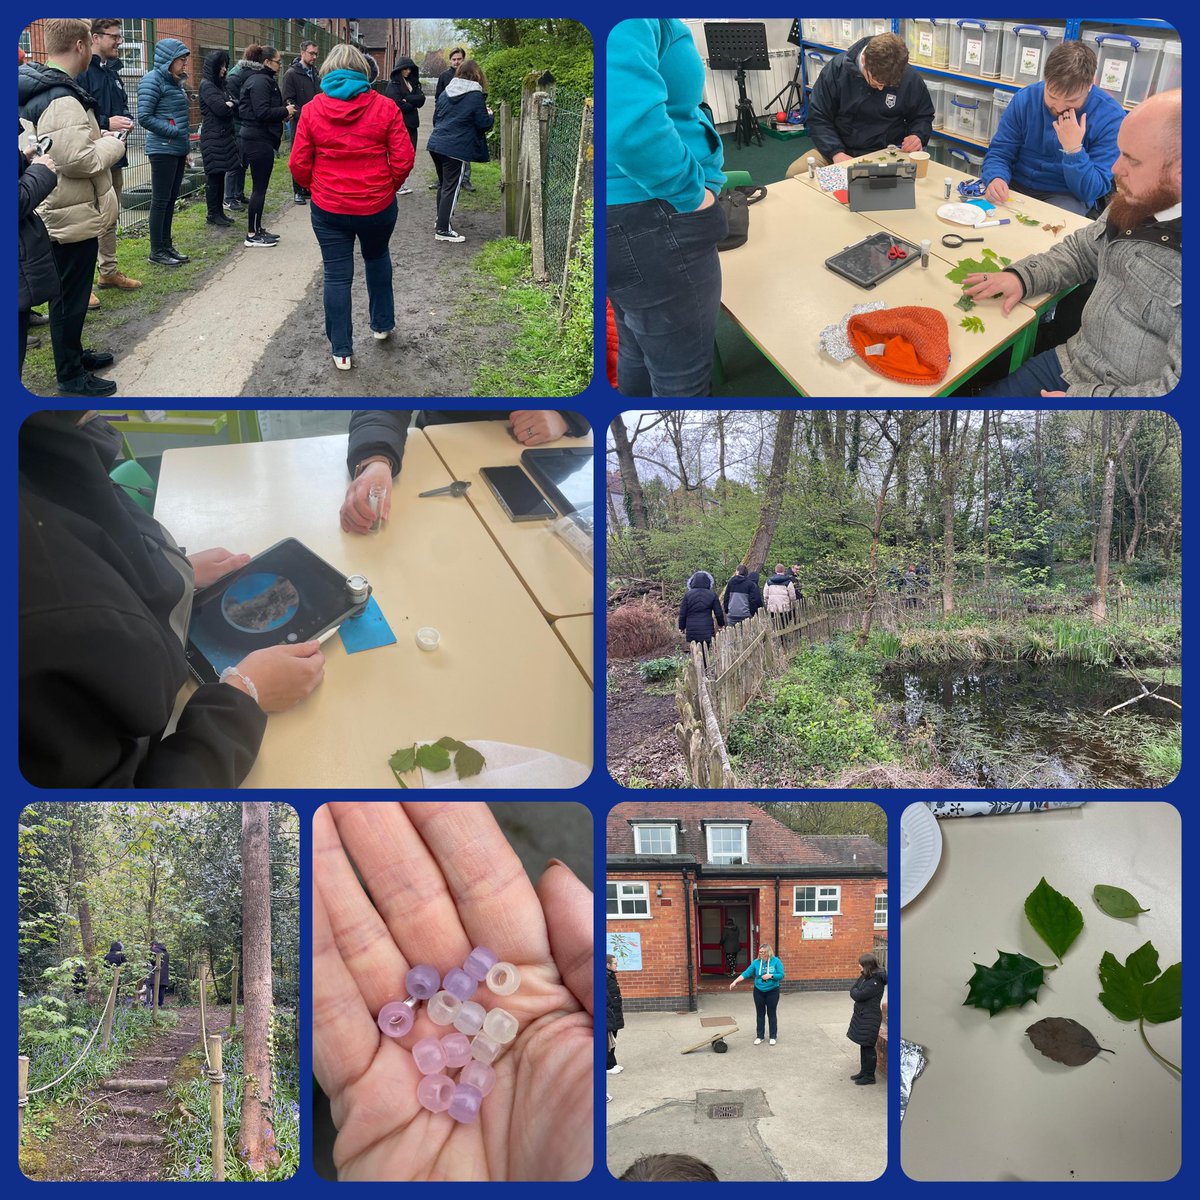 Had a fab afternoon with the wonderful @TransformTrust science leaders thinking about how we could bring science teaching out of the classroom. Thank you to @bagthorpeschool for hosting. We loved the pupils who greeted us. #TogetherWeAchieve #PrimaryScience #LearningOutdoors